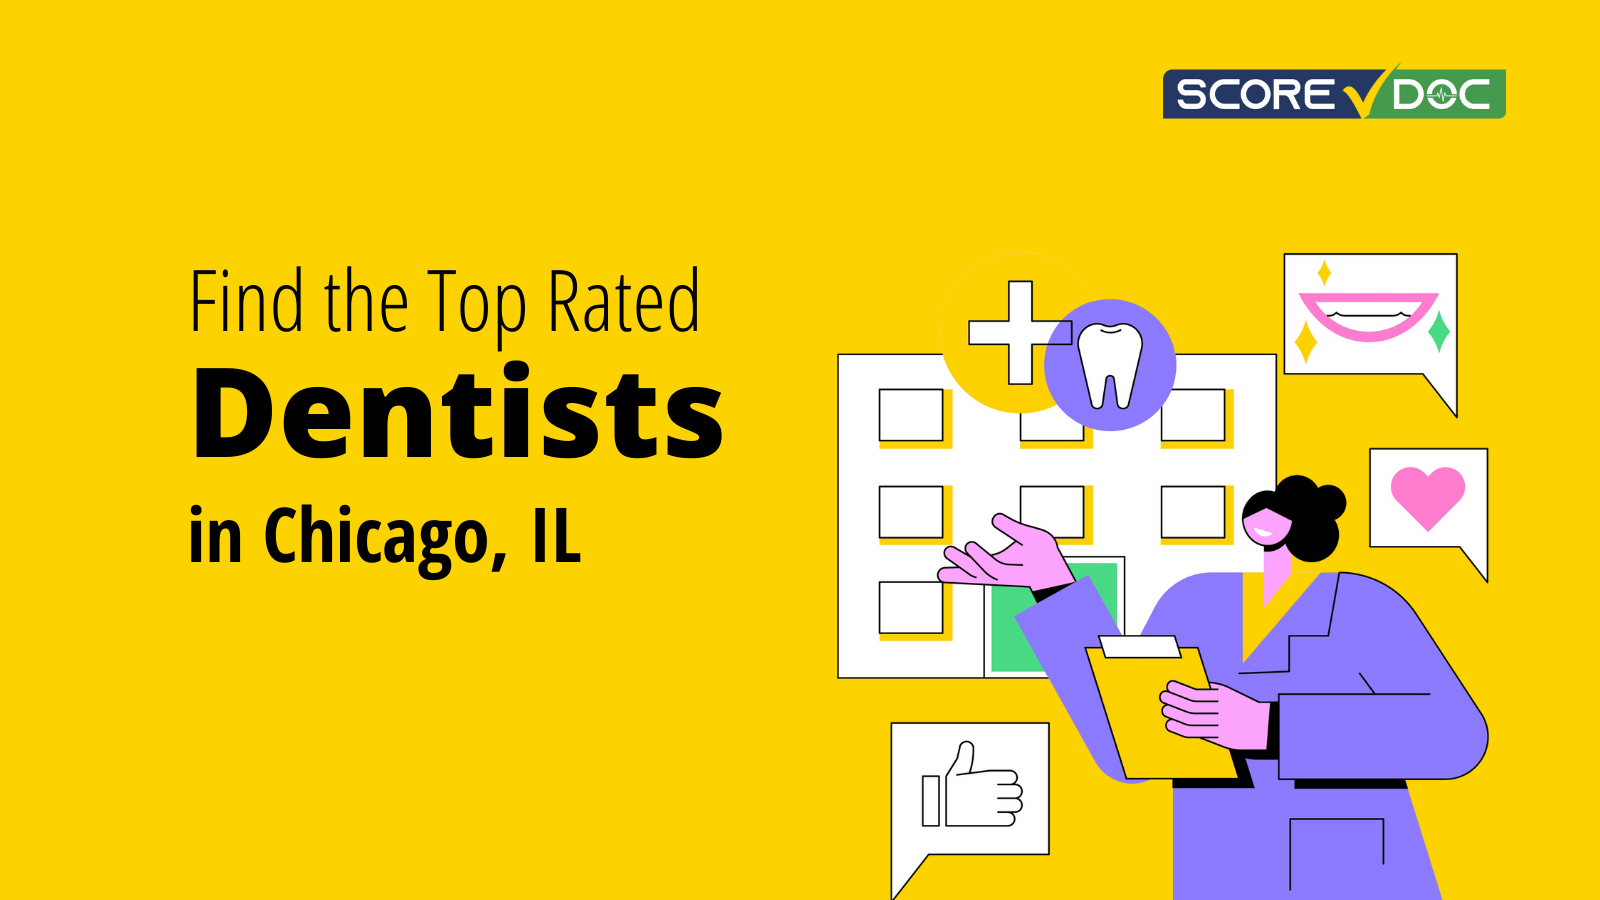 26 Top Rated Dentists in Chicago, IL